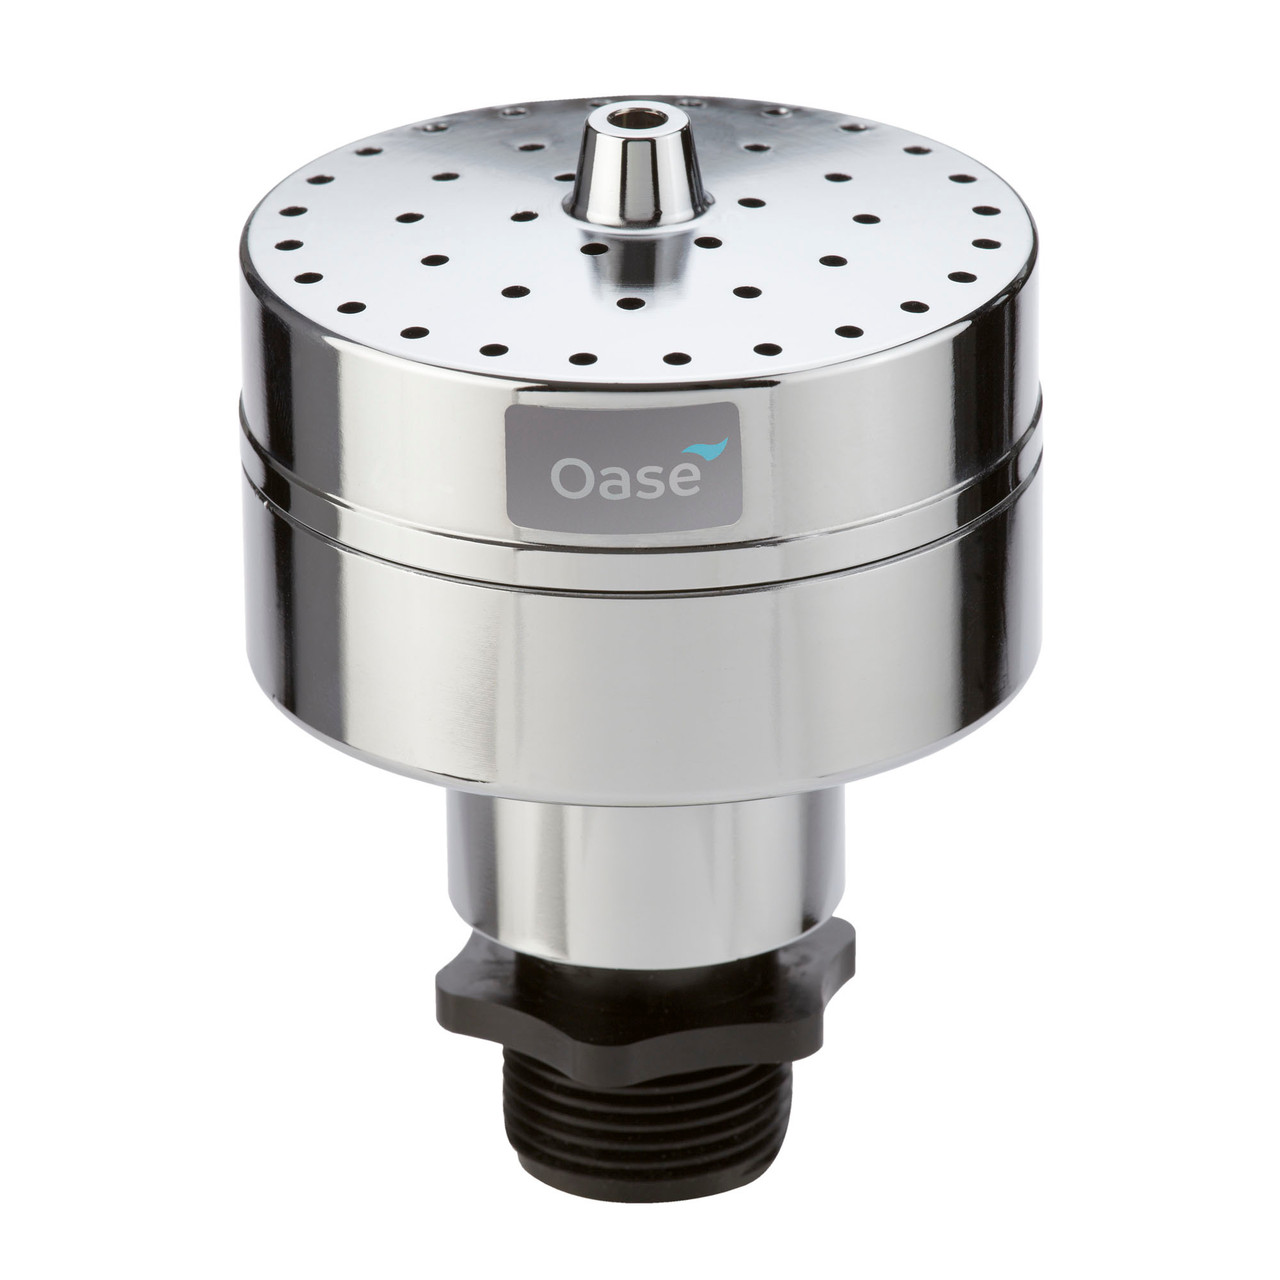 Oase Vulcan 43 - 3 Nozzles (FREE SHIPPING)